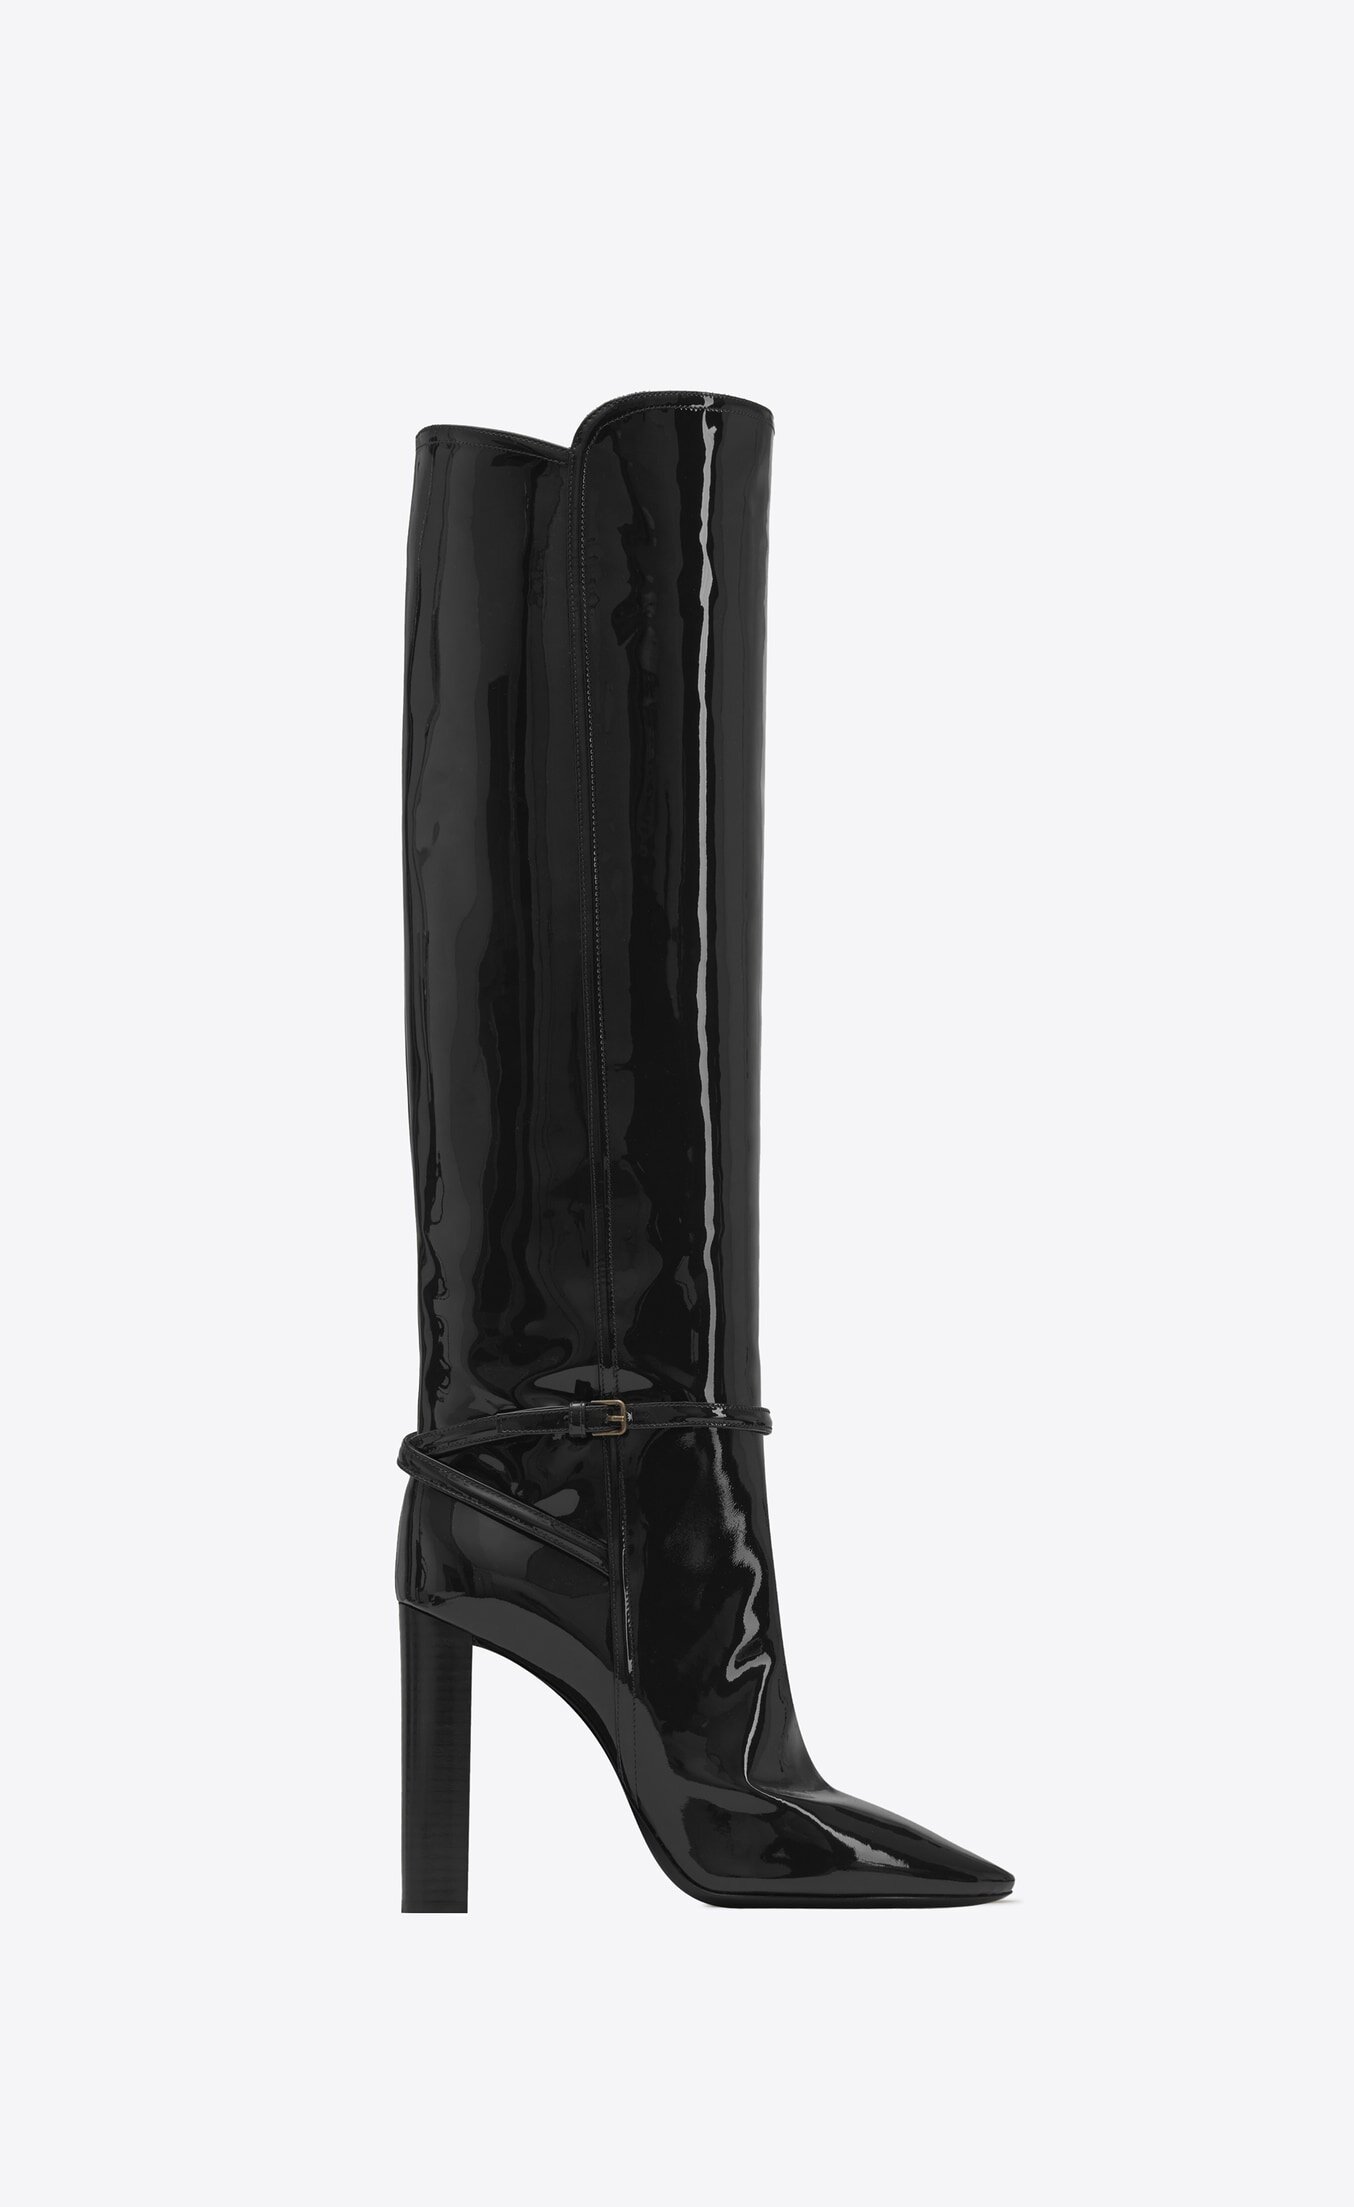 Saint Laurent 76 Knee-High Boots in Black Patent Leather.jpg